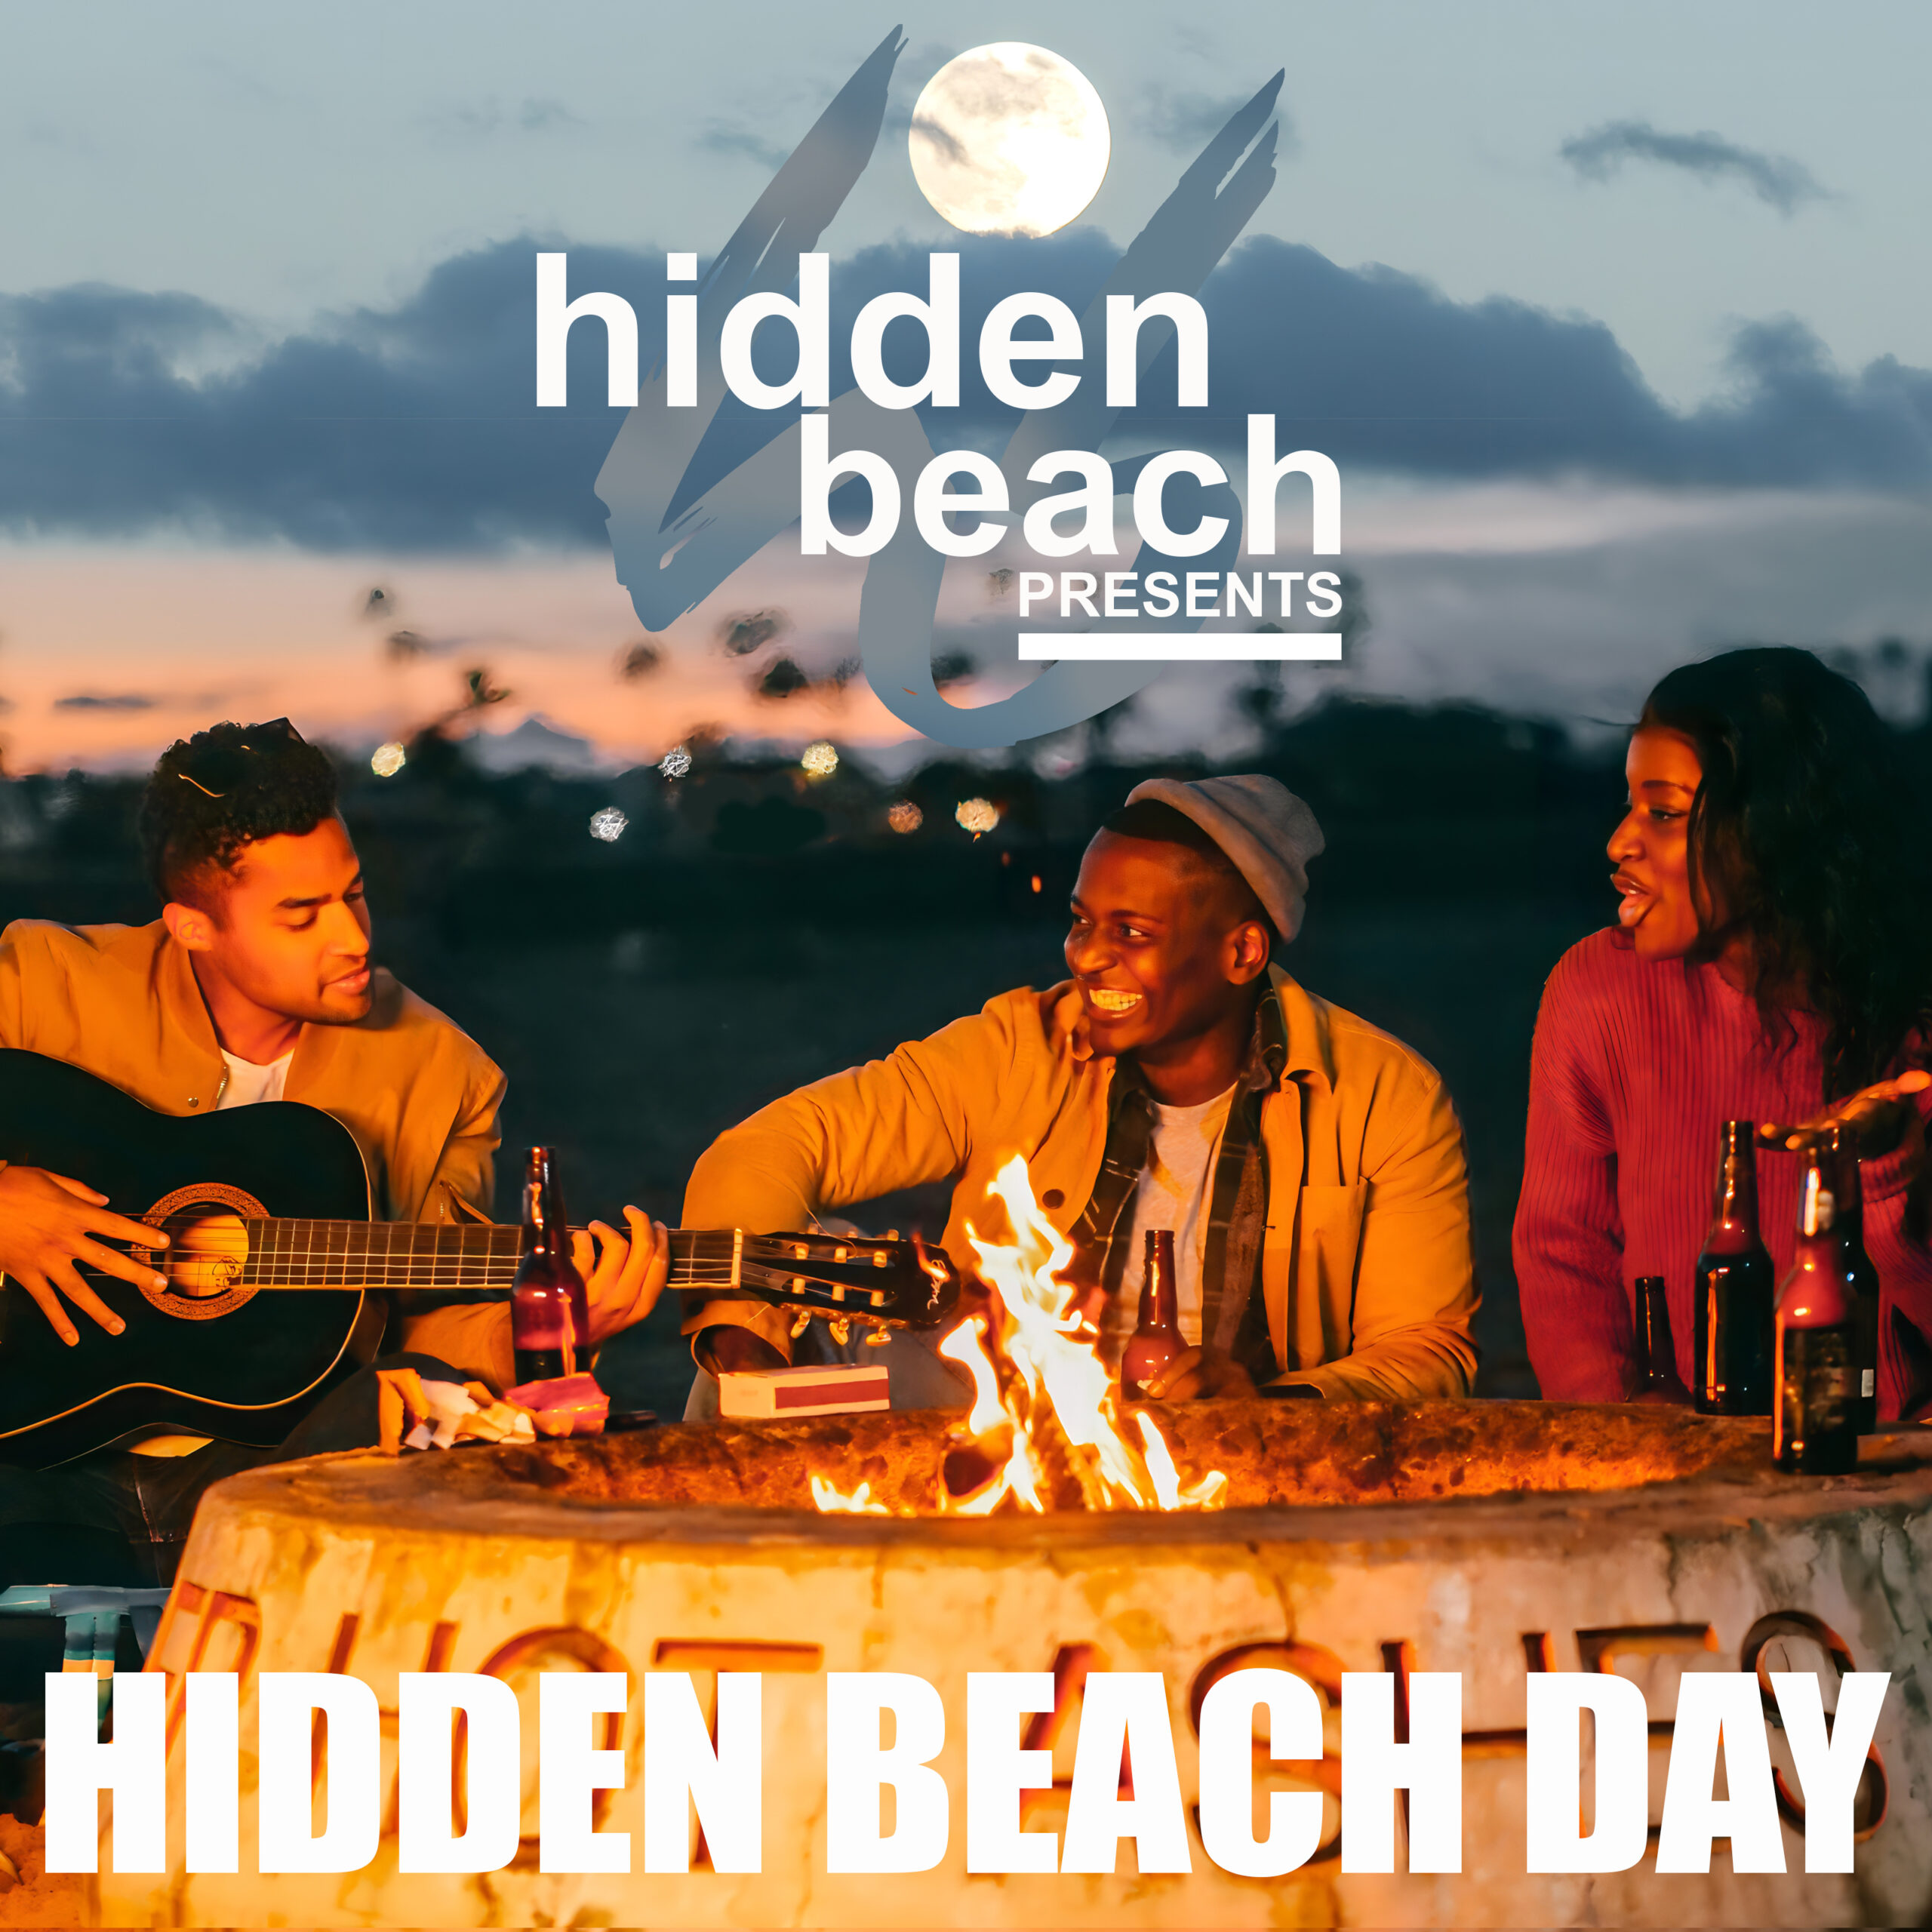 Hidden Beach Day blog post featured image with 3 friends on the beach in front of a bonfire jamming out to music with a guitar